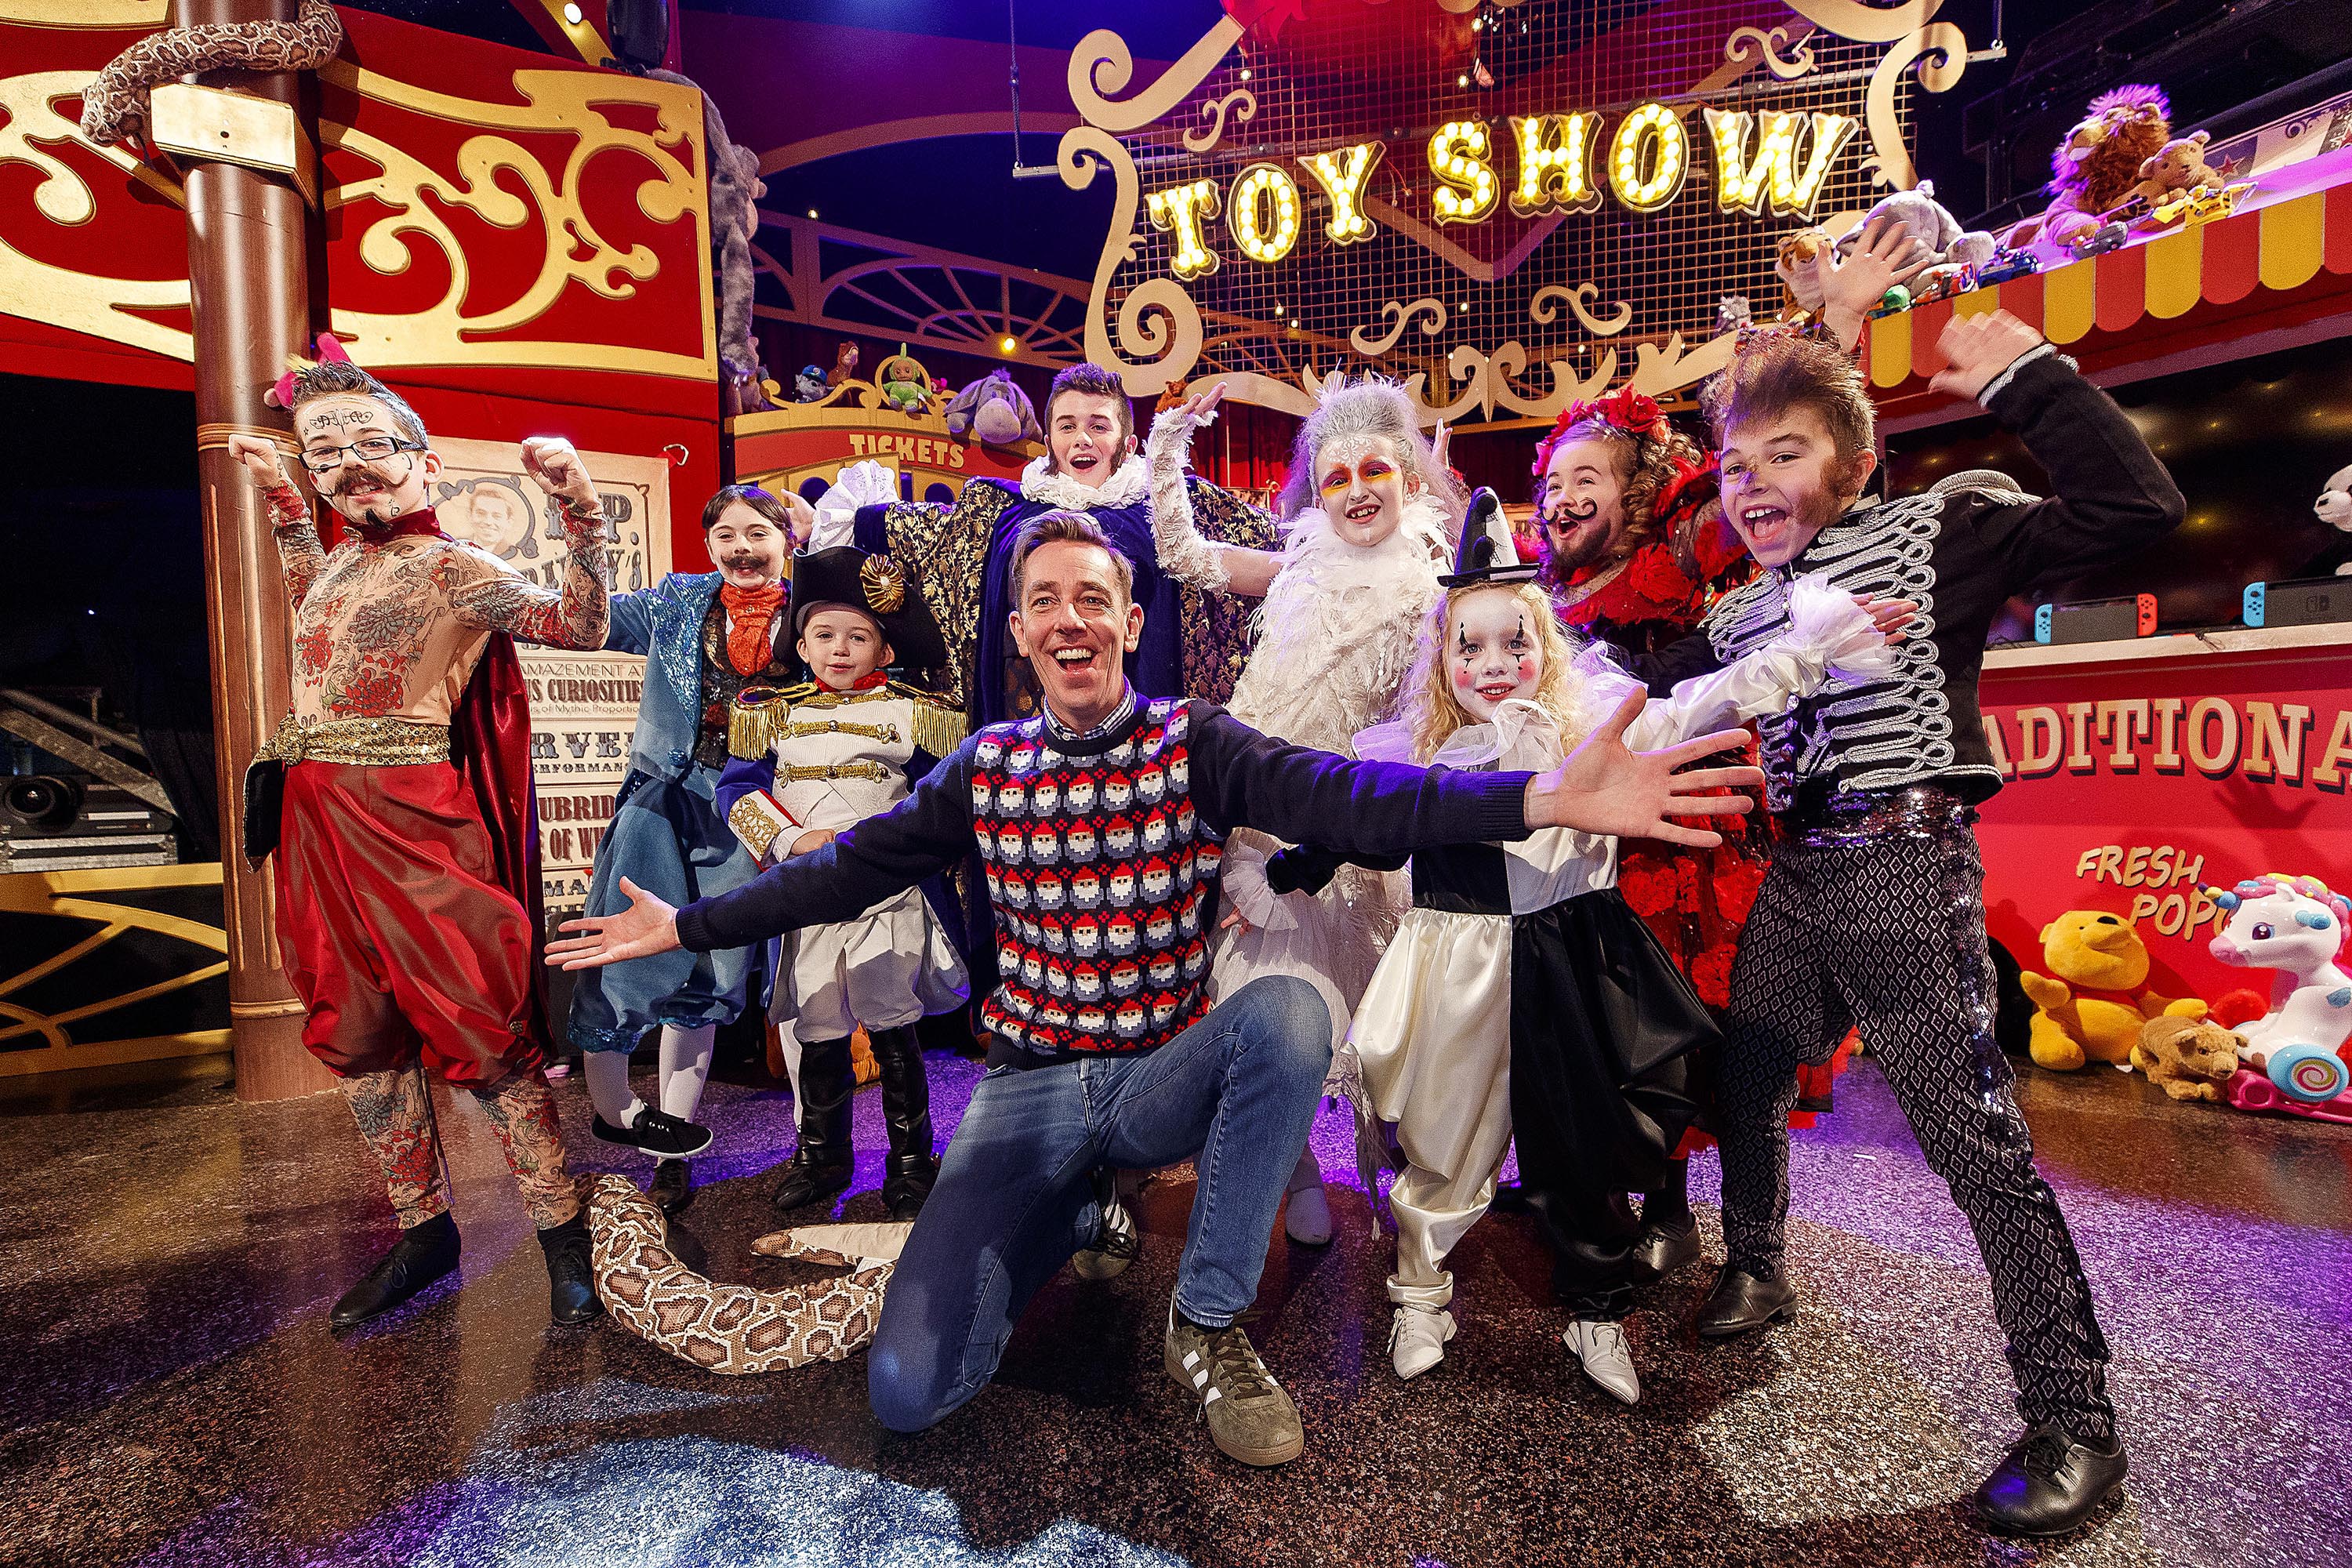 ***Embargoed untill 30/11/2018*** Repro Free: 29/10/2018 The theme of this year’s Late Late Toy Show was revealed to be The Greatest Showman. Host Ryan Tubridy and the cast of hundreds have prepared for the most magical night of the Irish television. Pictured with Ryan are some of the cast Tatto Man Dylan Allen (5) from Navan, 3-Legged Man Kayla McMahon (10) from Balrothery, Napoleon Luke O'Connor (7) from Dublin, Fatman Mathew Little (12) from Dublin, Albino Ella Maher (10) from Carlow, Pierrot clown enya Allen (5) from Navan, Bearded Lady, Alannah Willoughby (12) from Carlow and Wolf Man Colm O’Sullivan 98) from Navan. Picture Andres Poveda